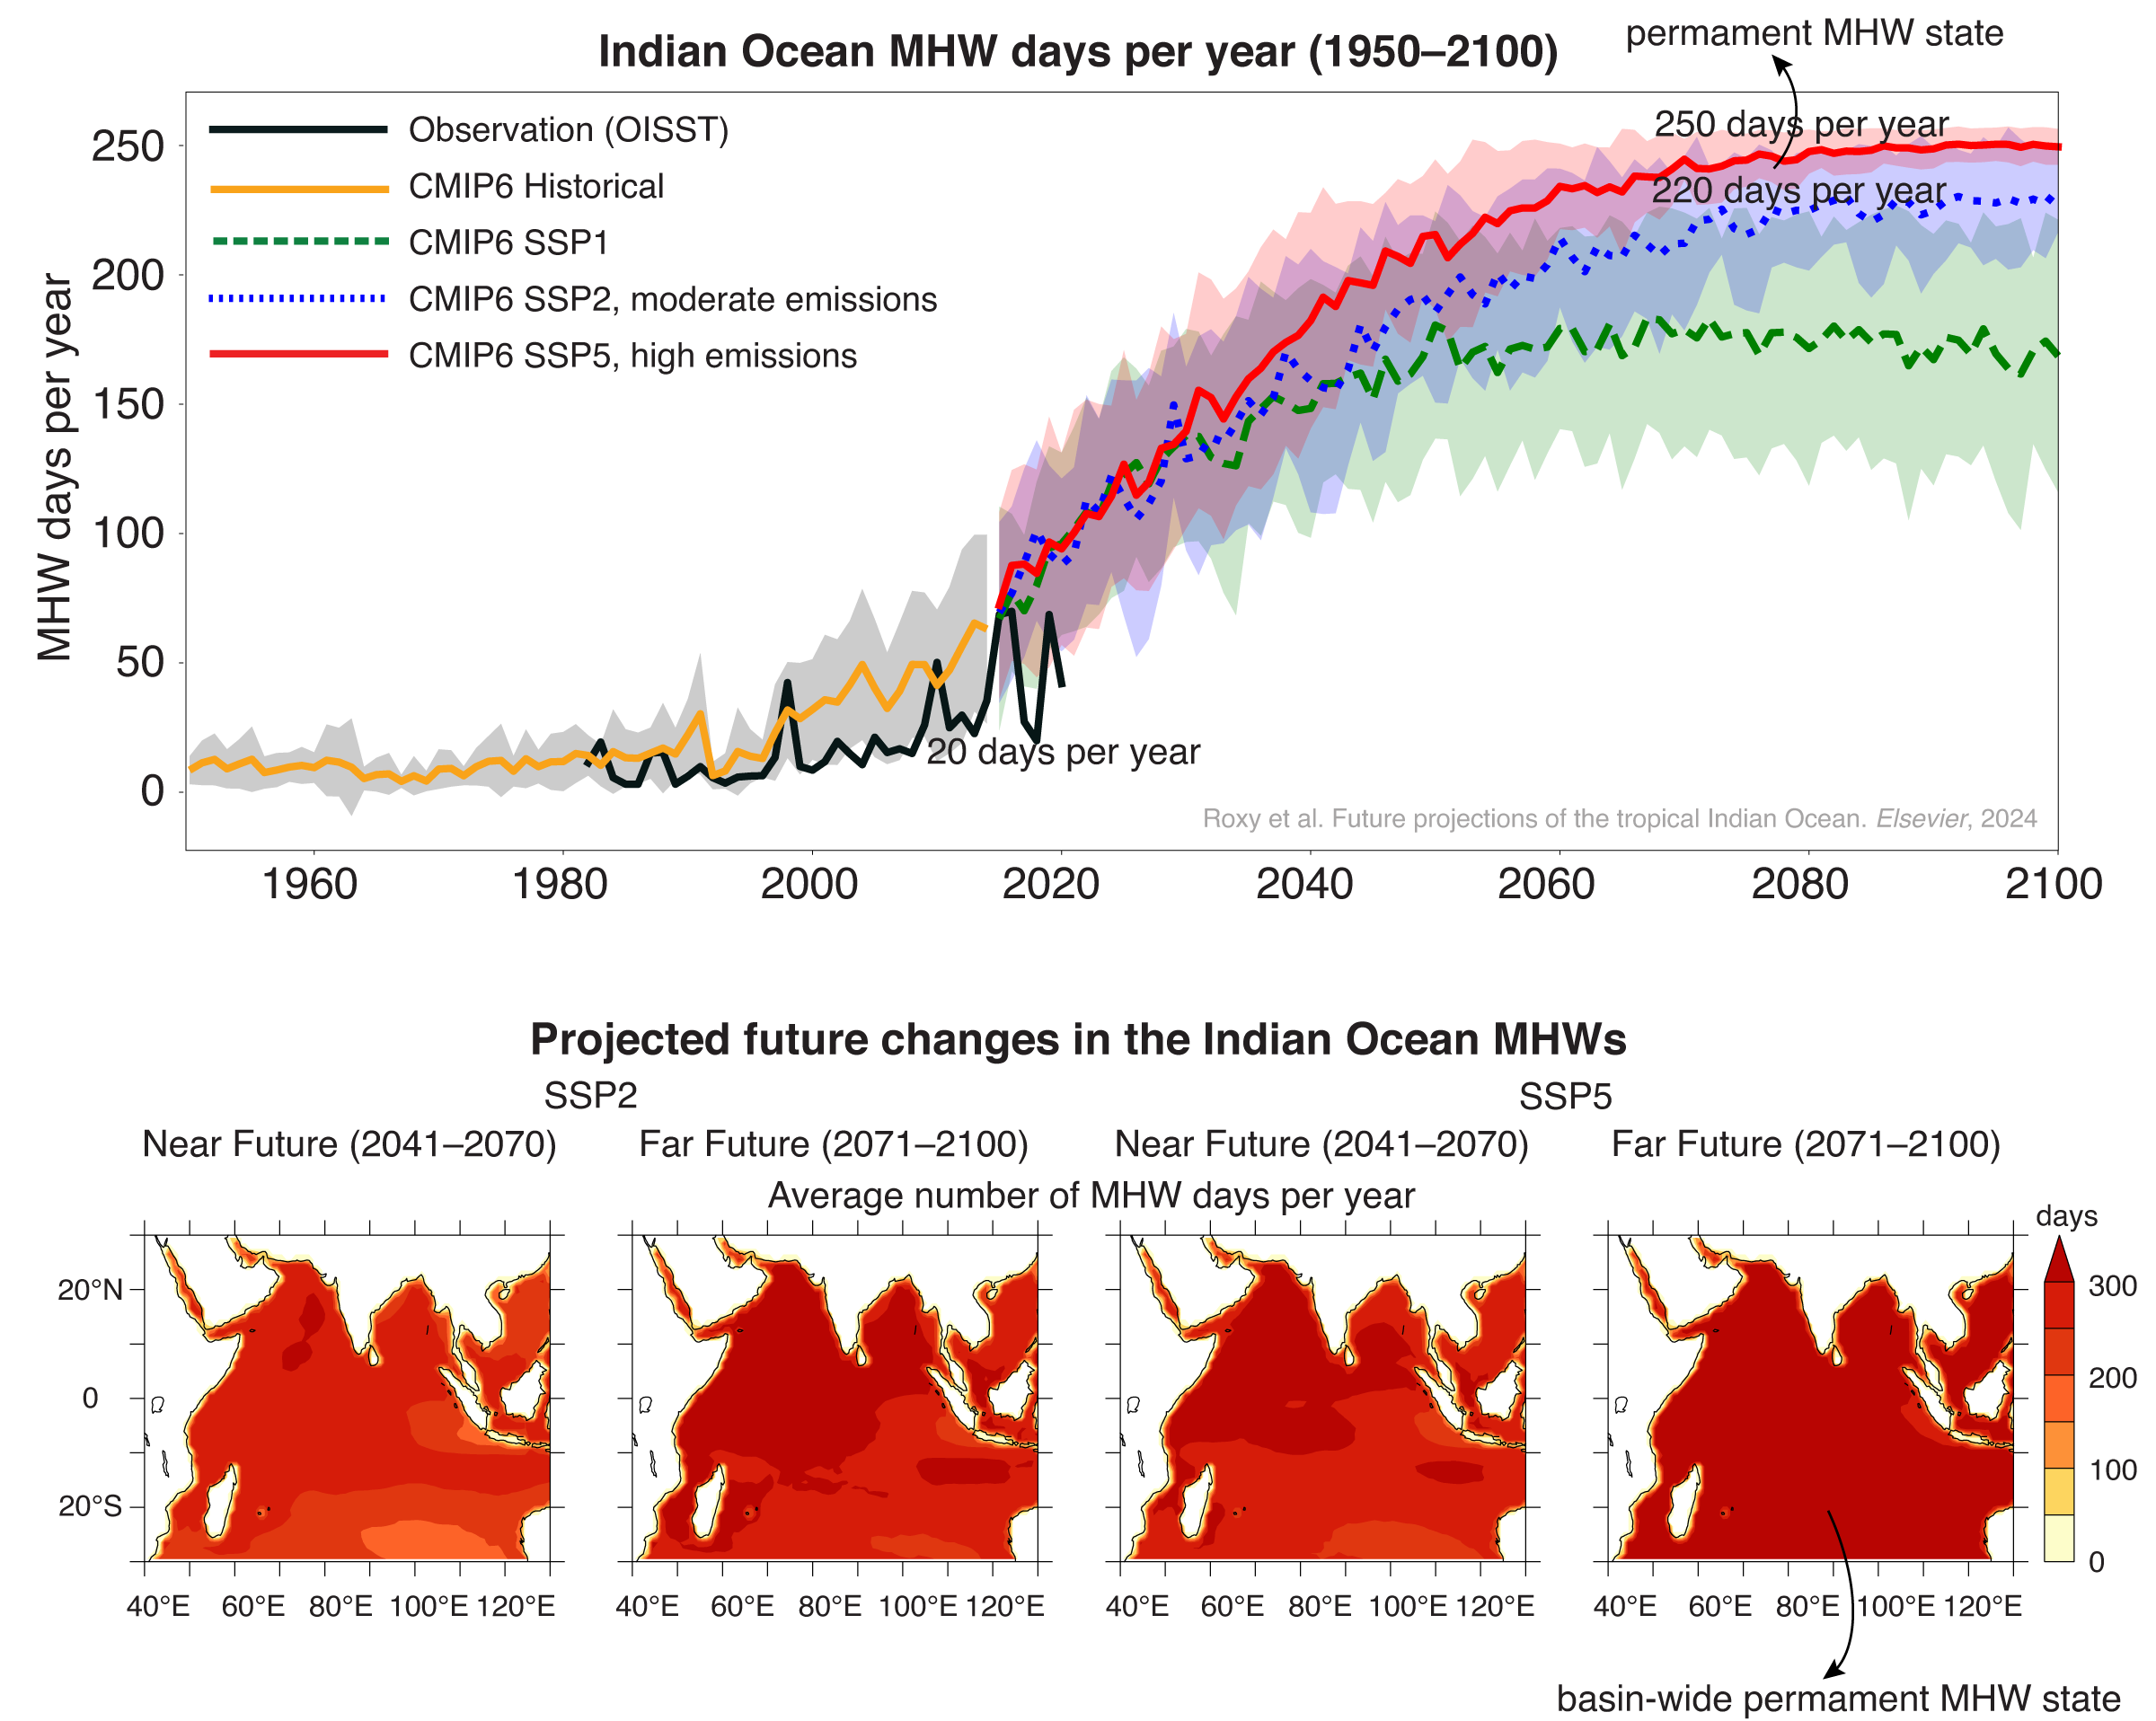 Permanent Marine Heatwave state in the Future Indian Ocean